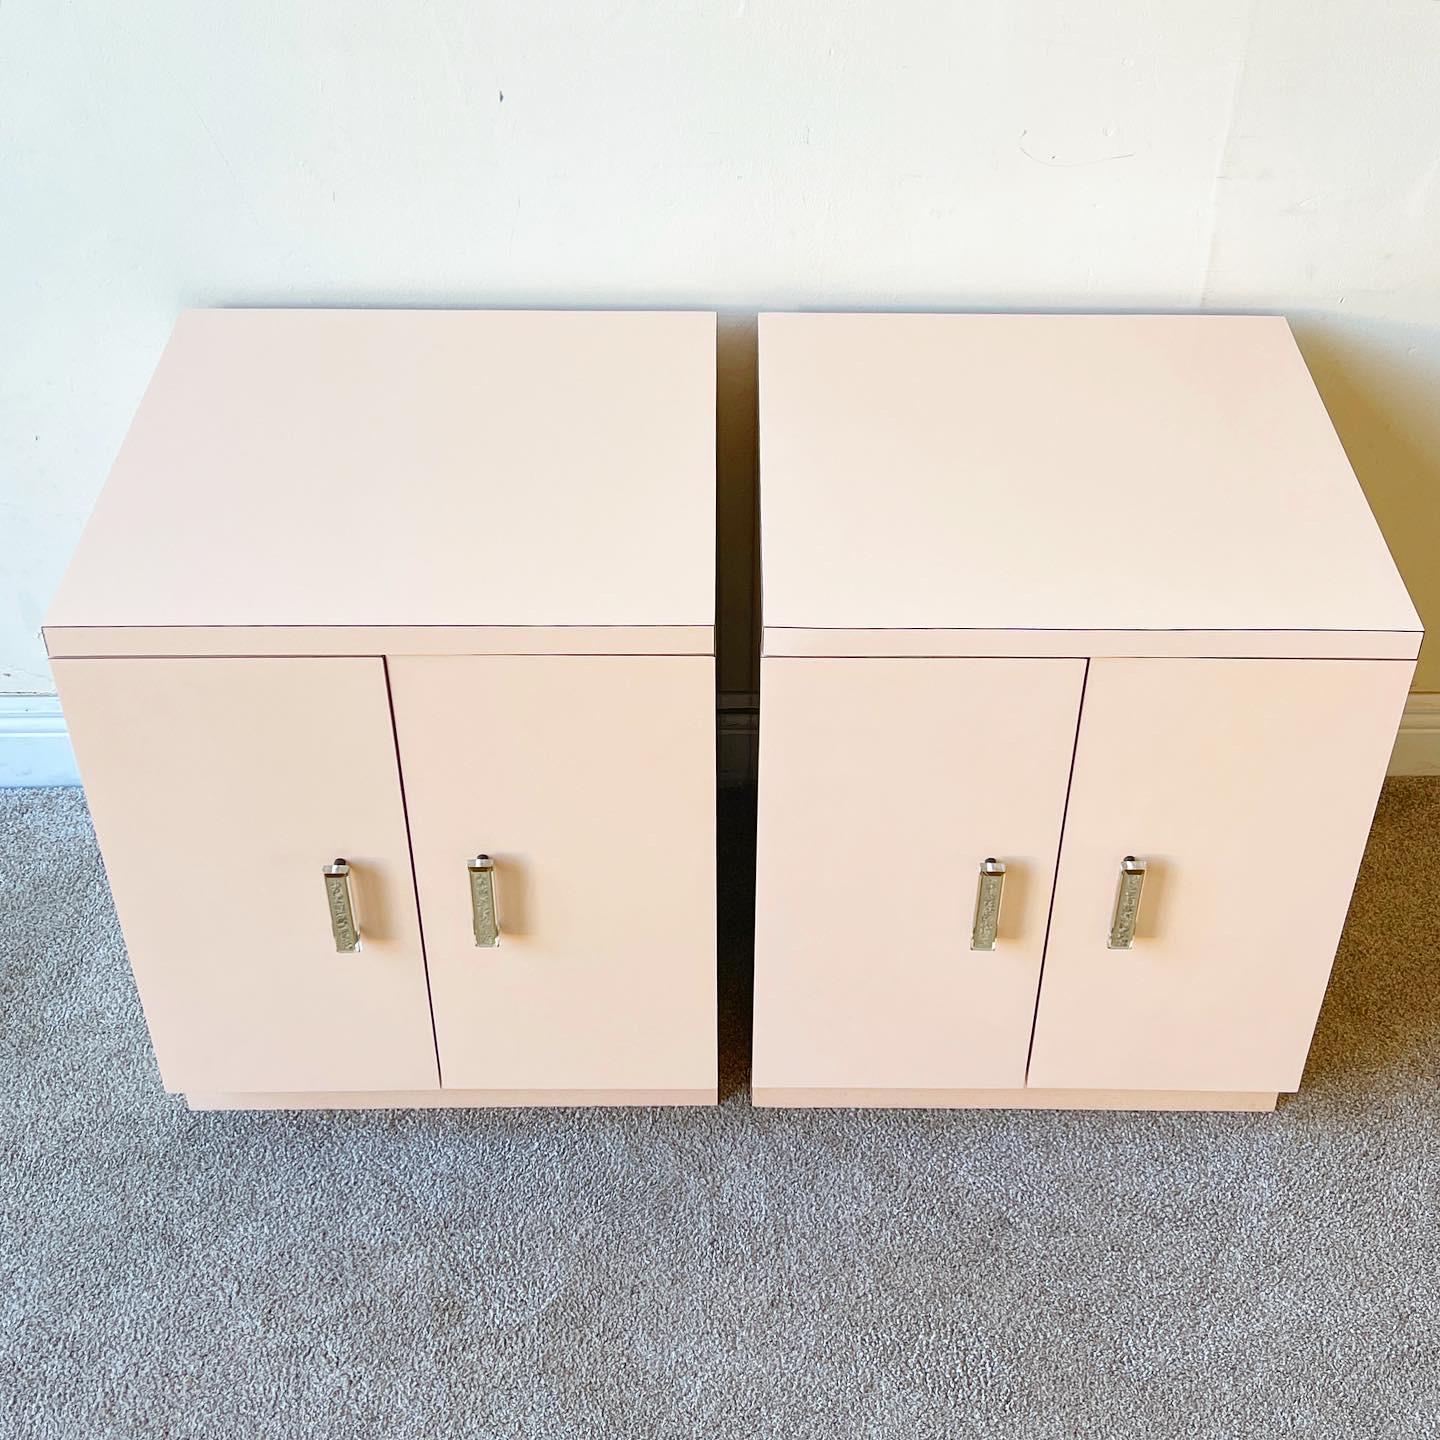 American Postmodern Peach Lacquer Laminate Cabinet Nightstands with Gold & Lucite Handles